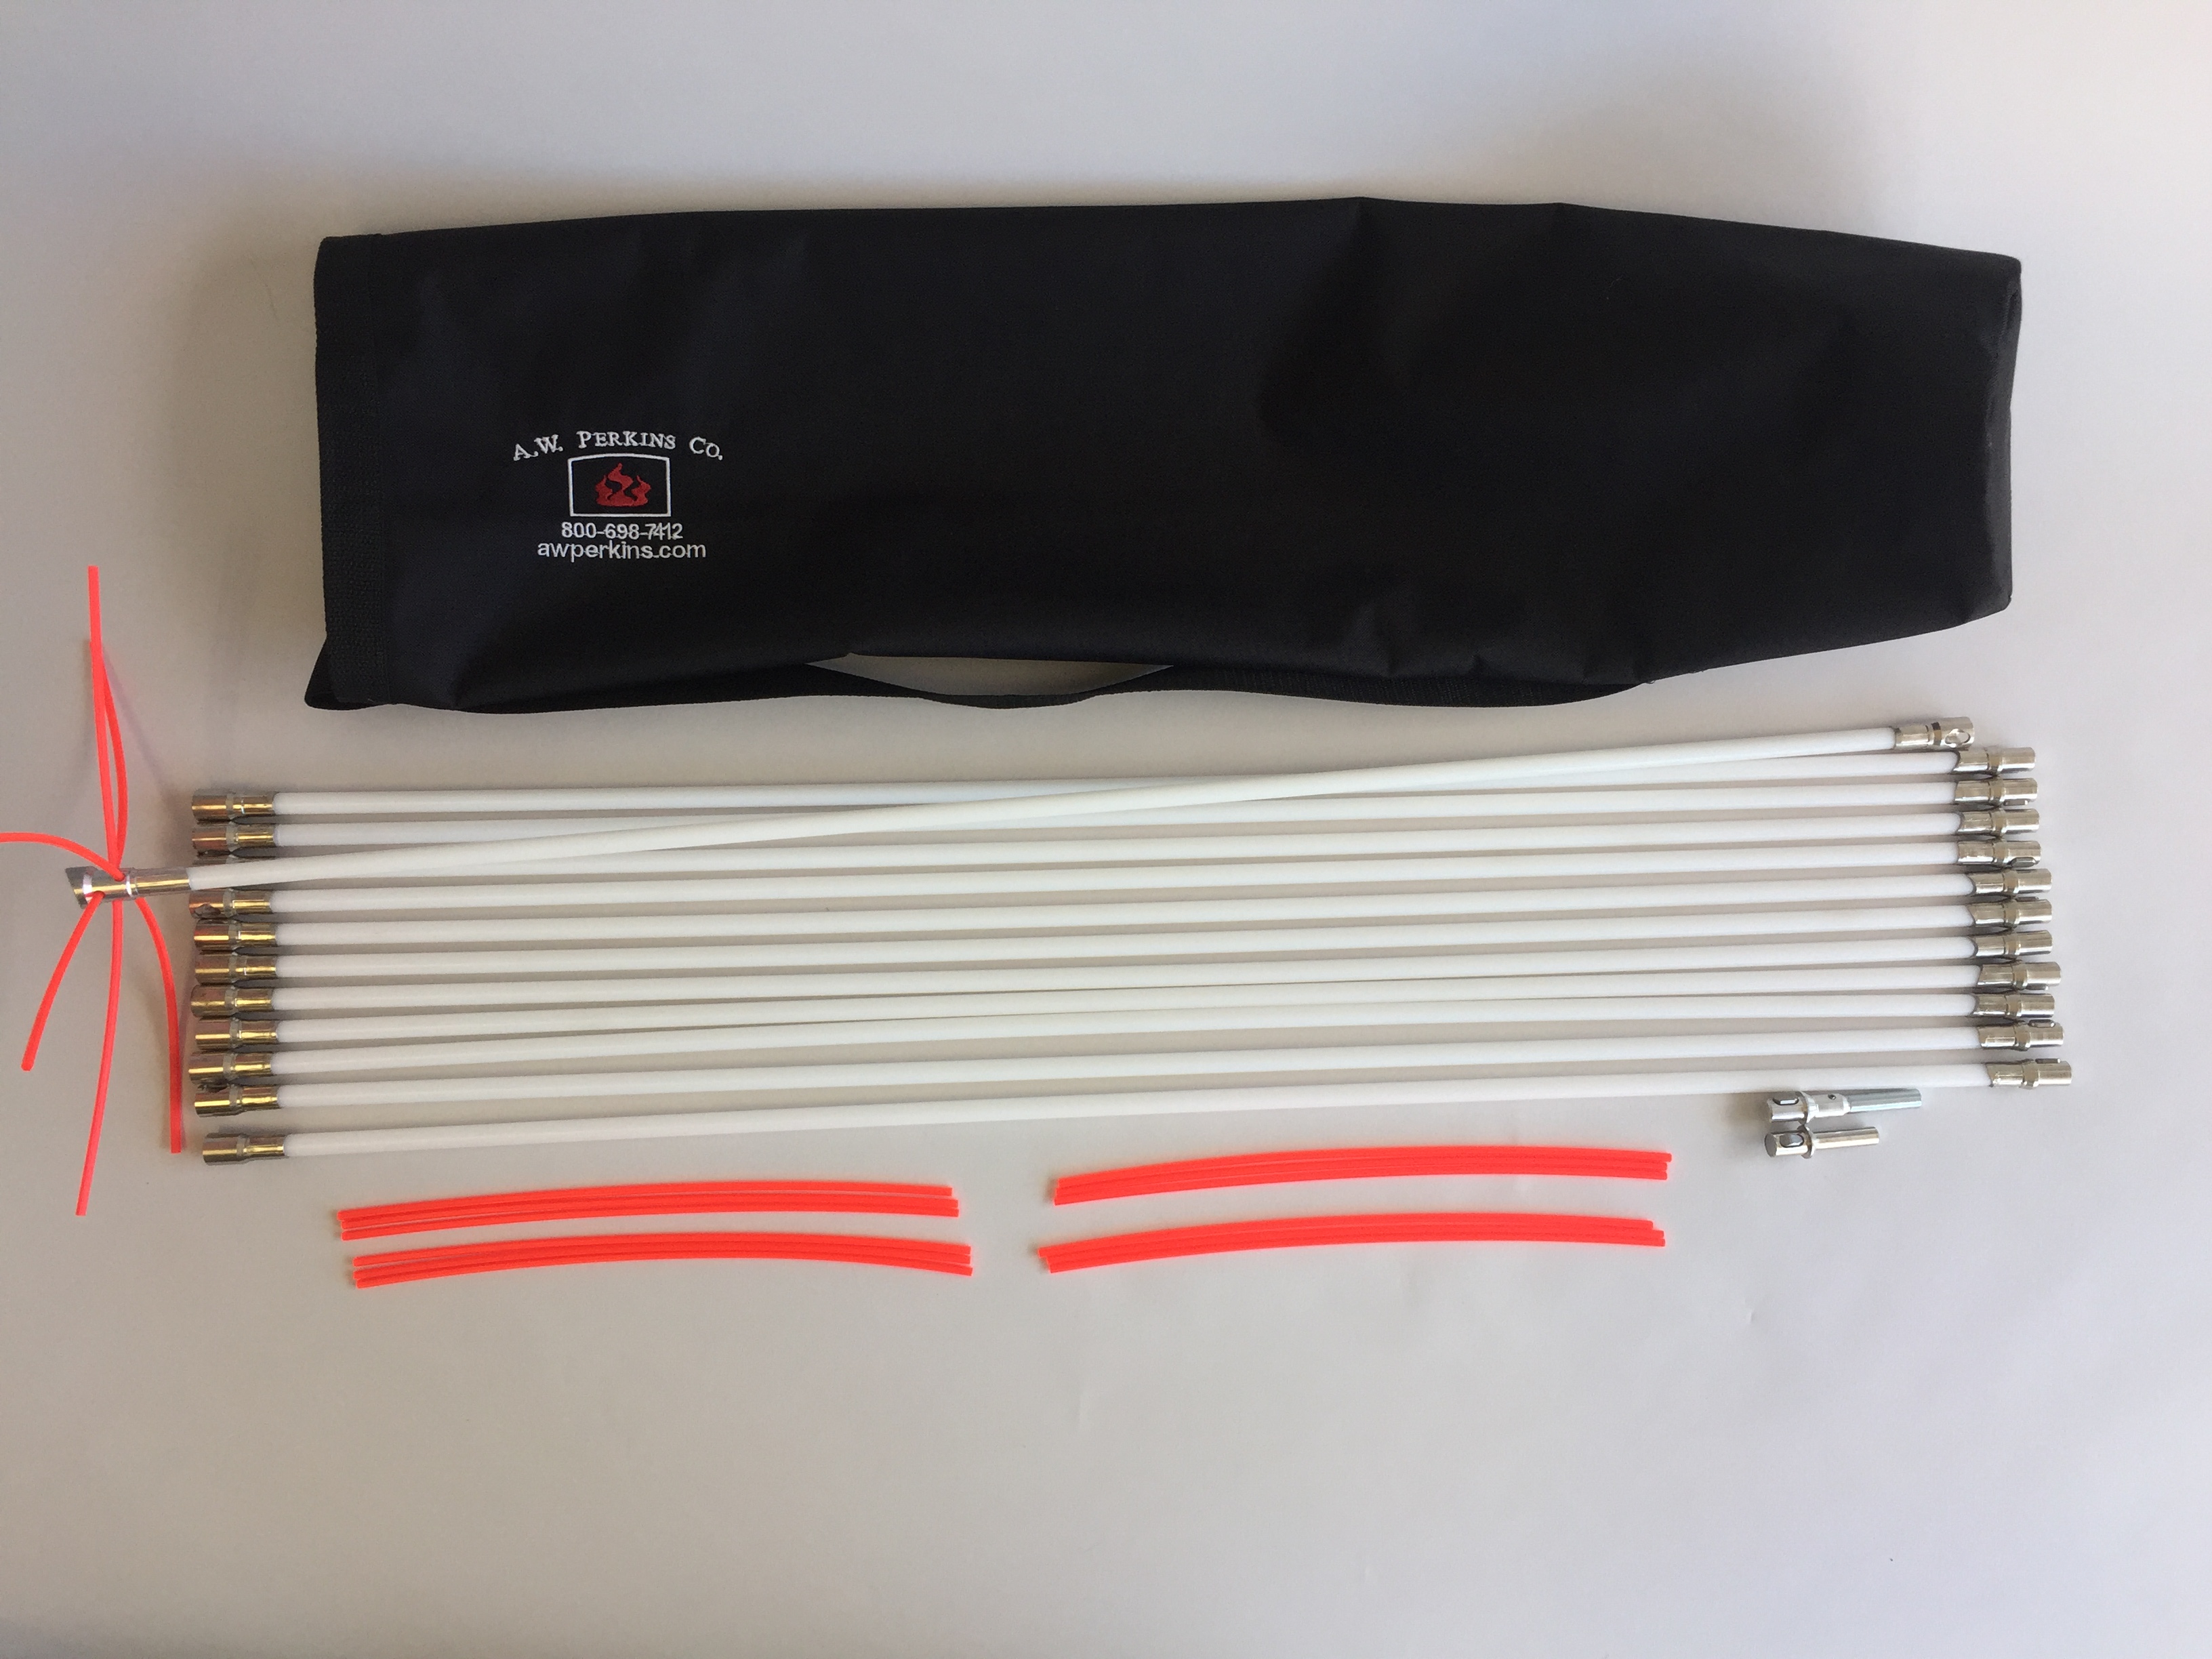 7163KIT Liner/Class A 36' Sweeping Kit with 7/16" dia. Slick rods